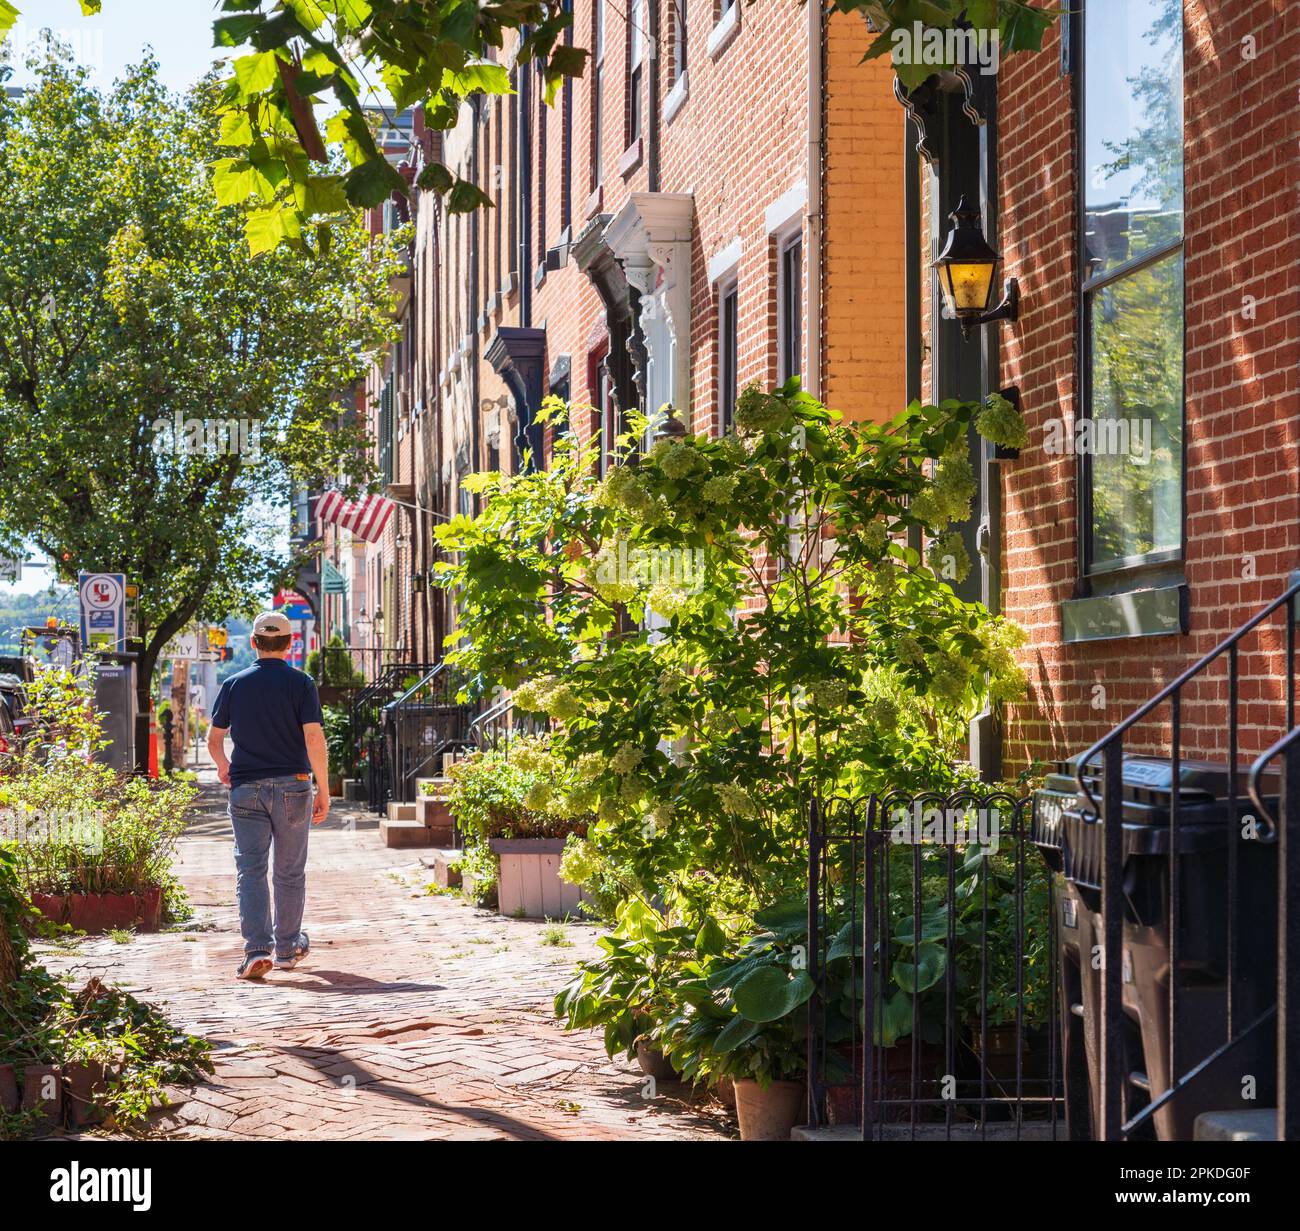 A man wearing a baseball cap walks down a street filled with charming brick row houses in Harrisburg, Pennsylvania Stock Photo